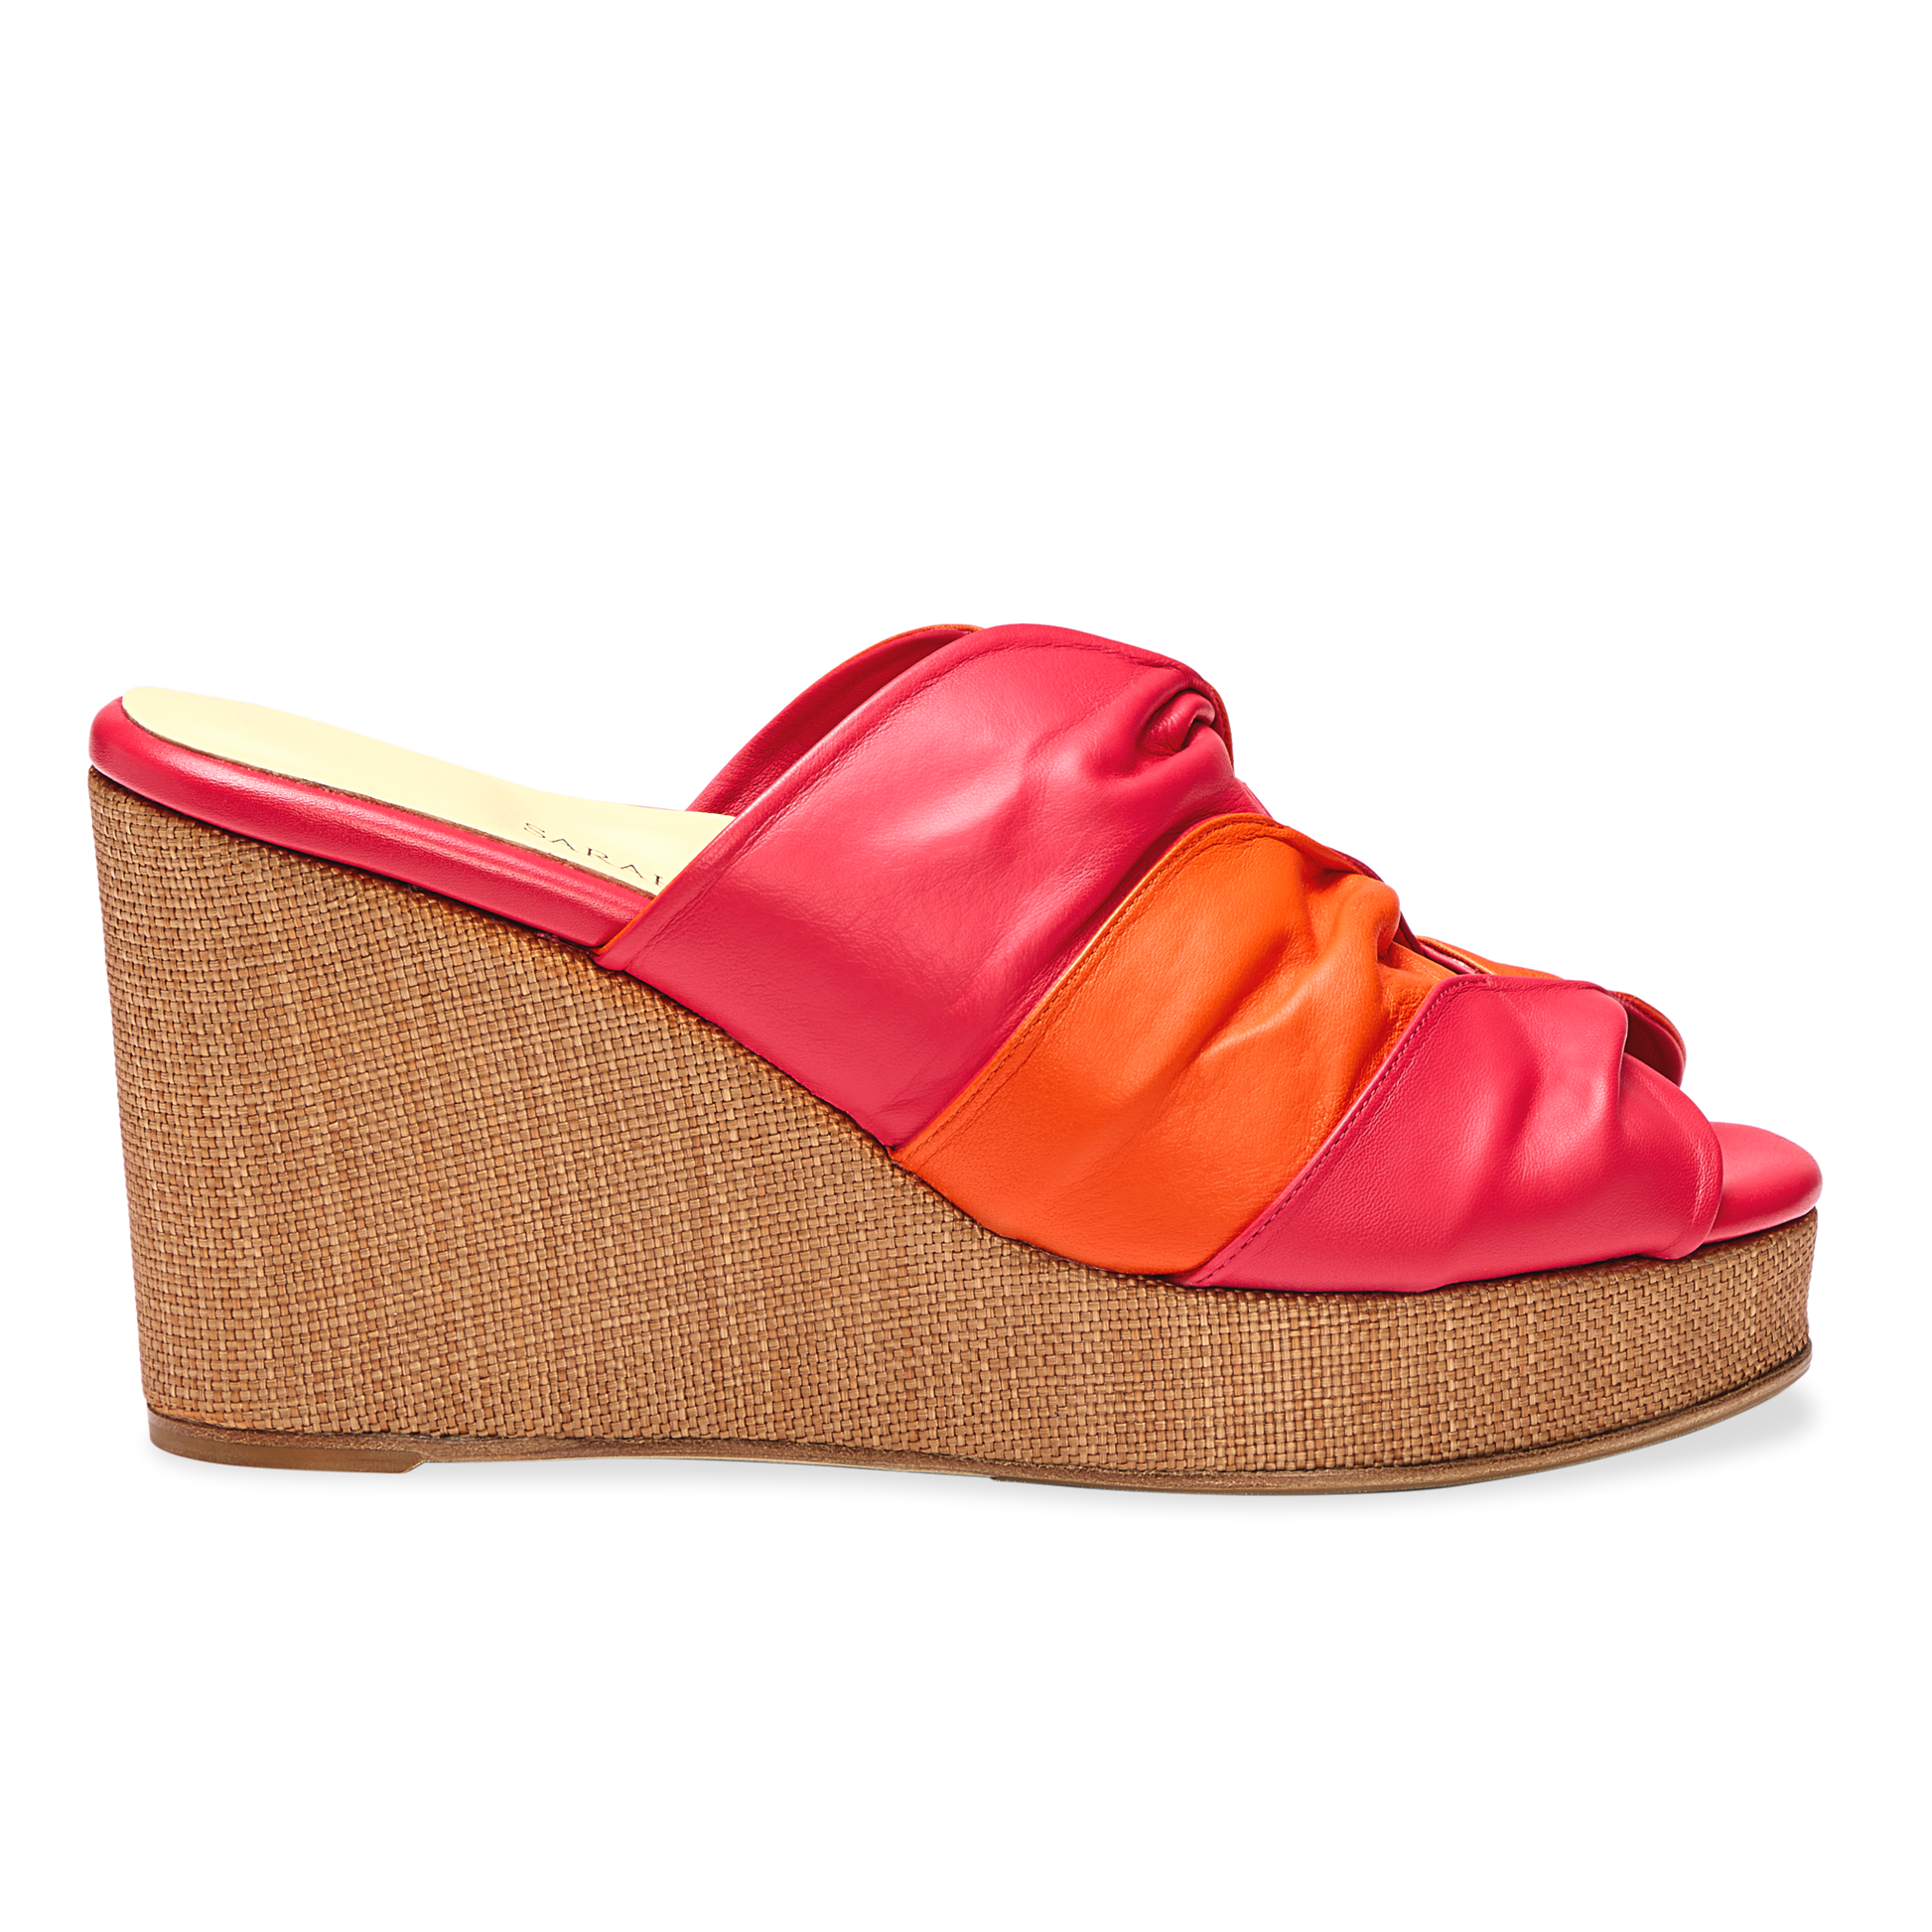 Perfect Arabesque Wedge 80 in Positano Pink Nappa & Woven Wedge